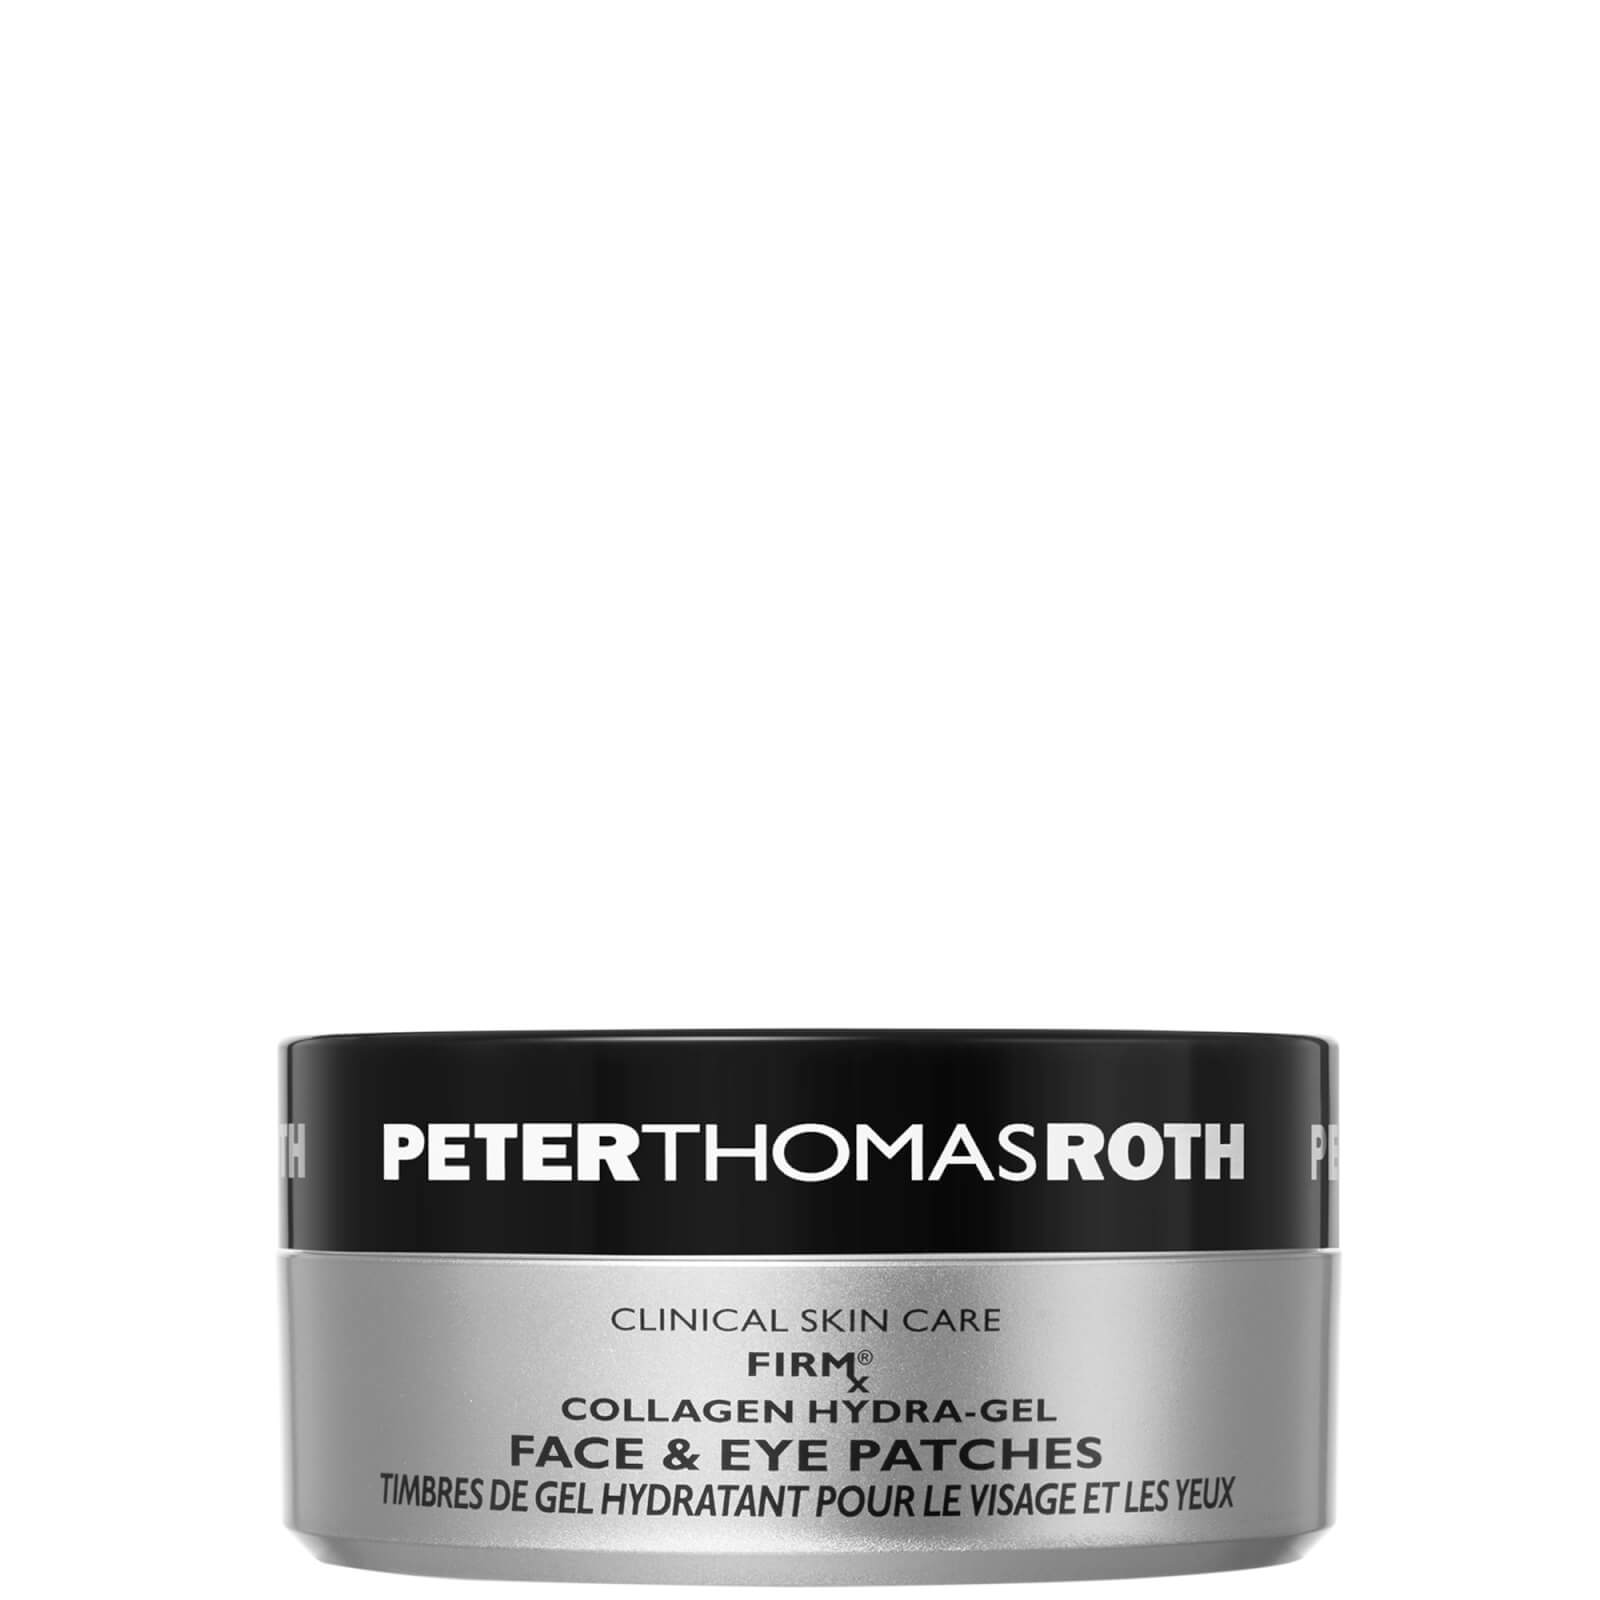 Image of Peter Thomas Roth FIRMx Collagen Hydra-Gel Face and Eye Patches